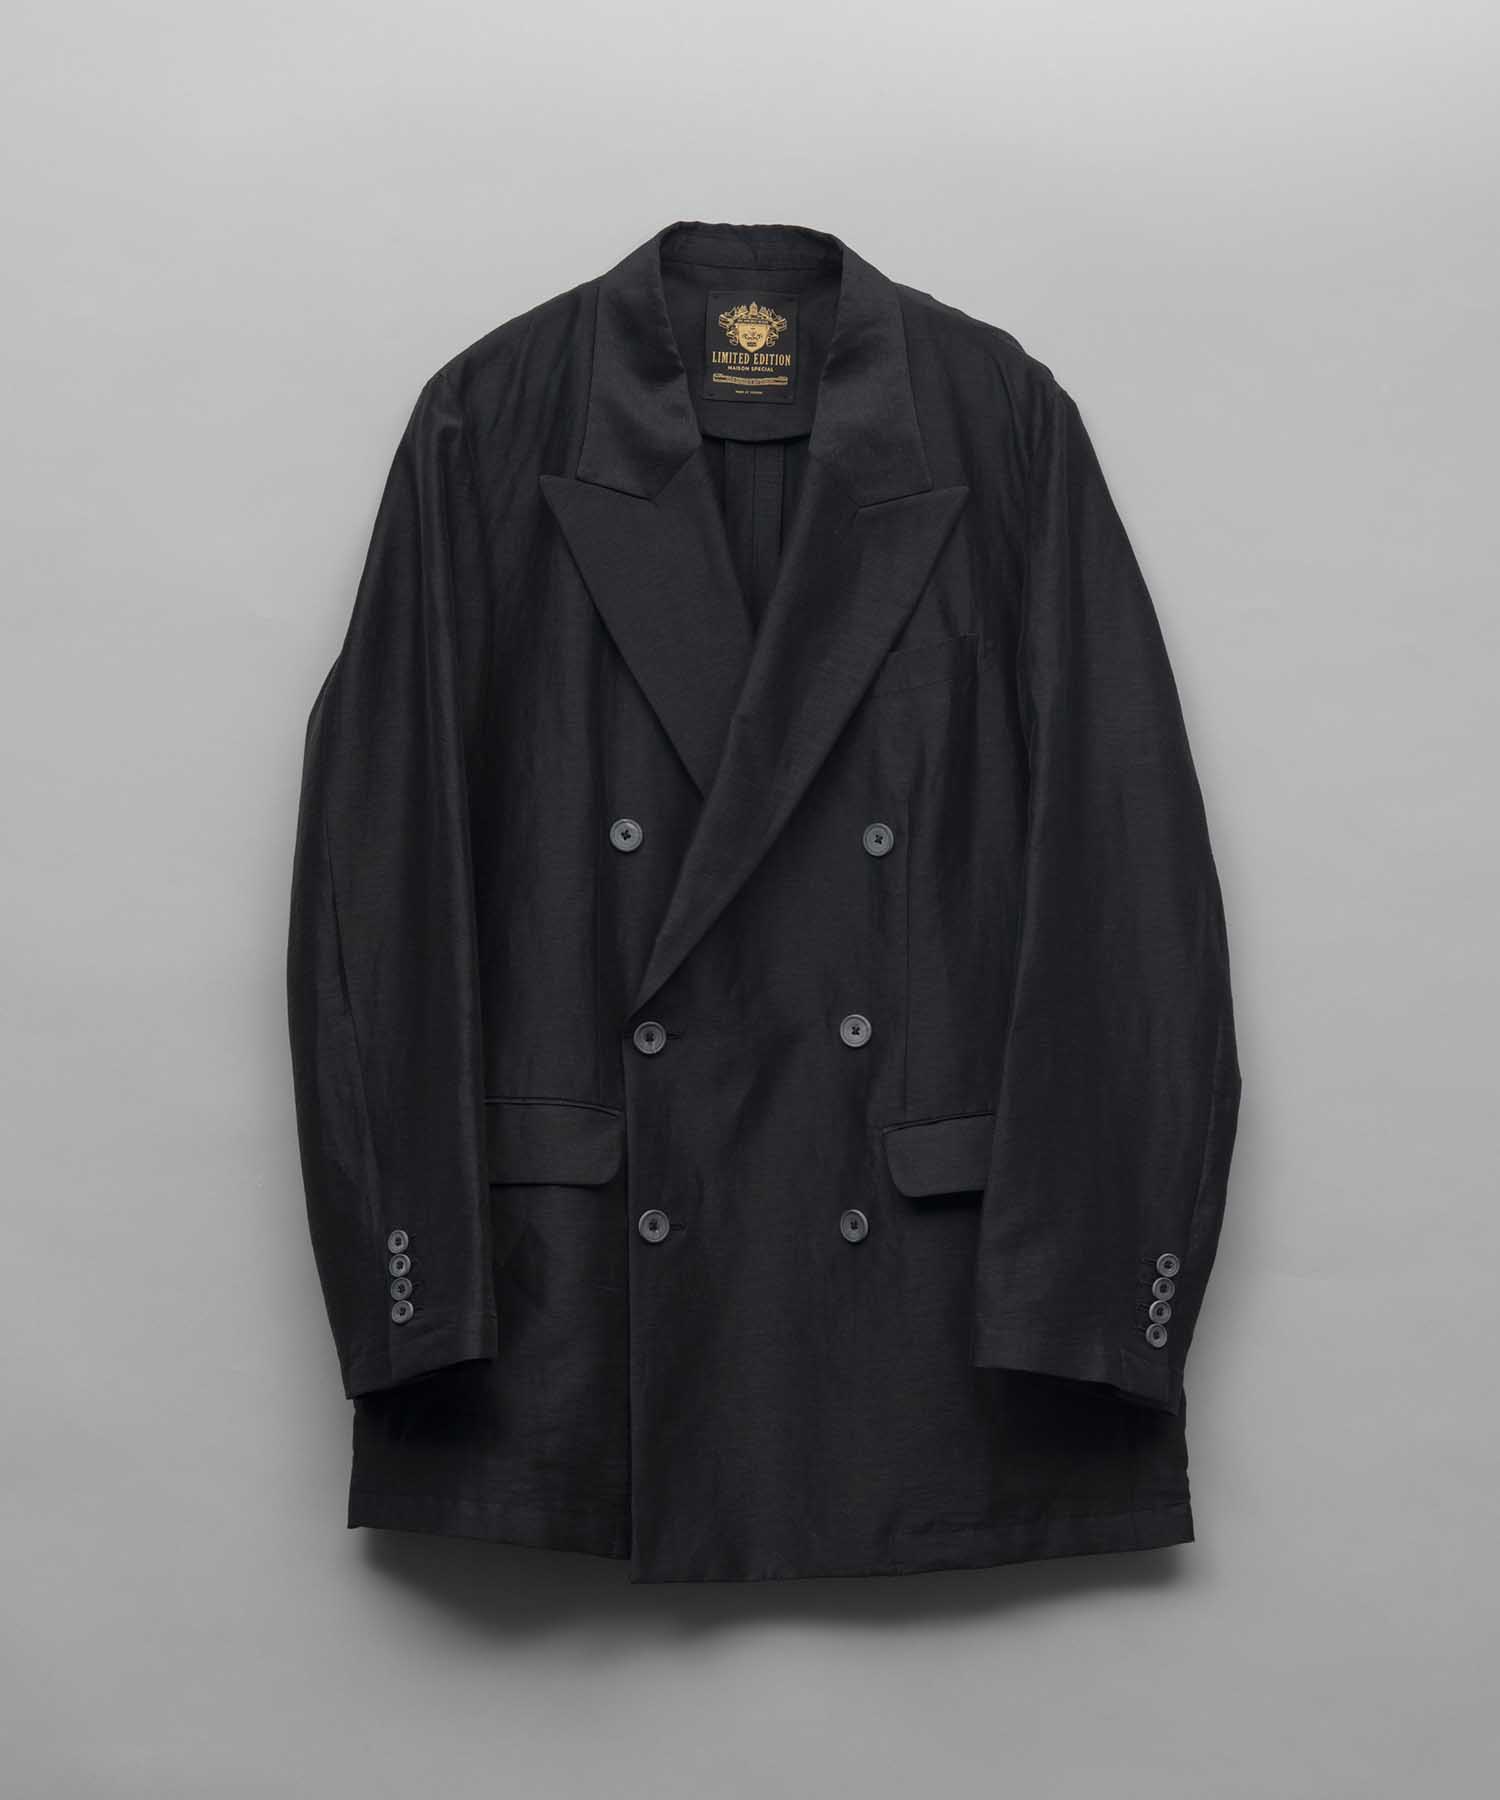 [Limited Edition] Dress-Over Peaked Lapel Double Tailored Jacket